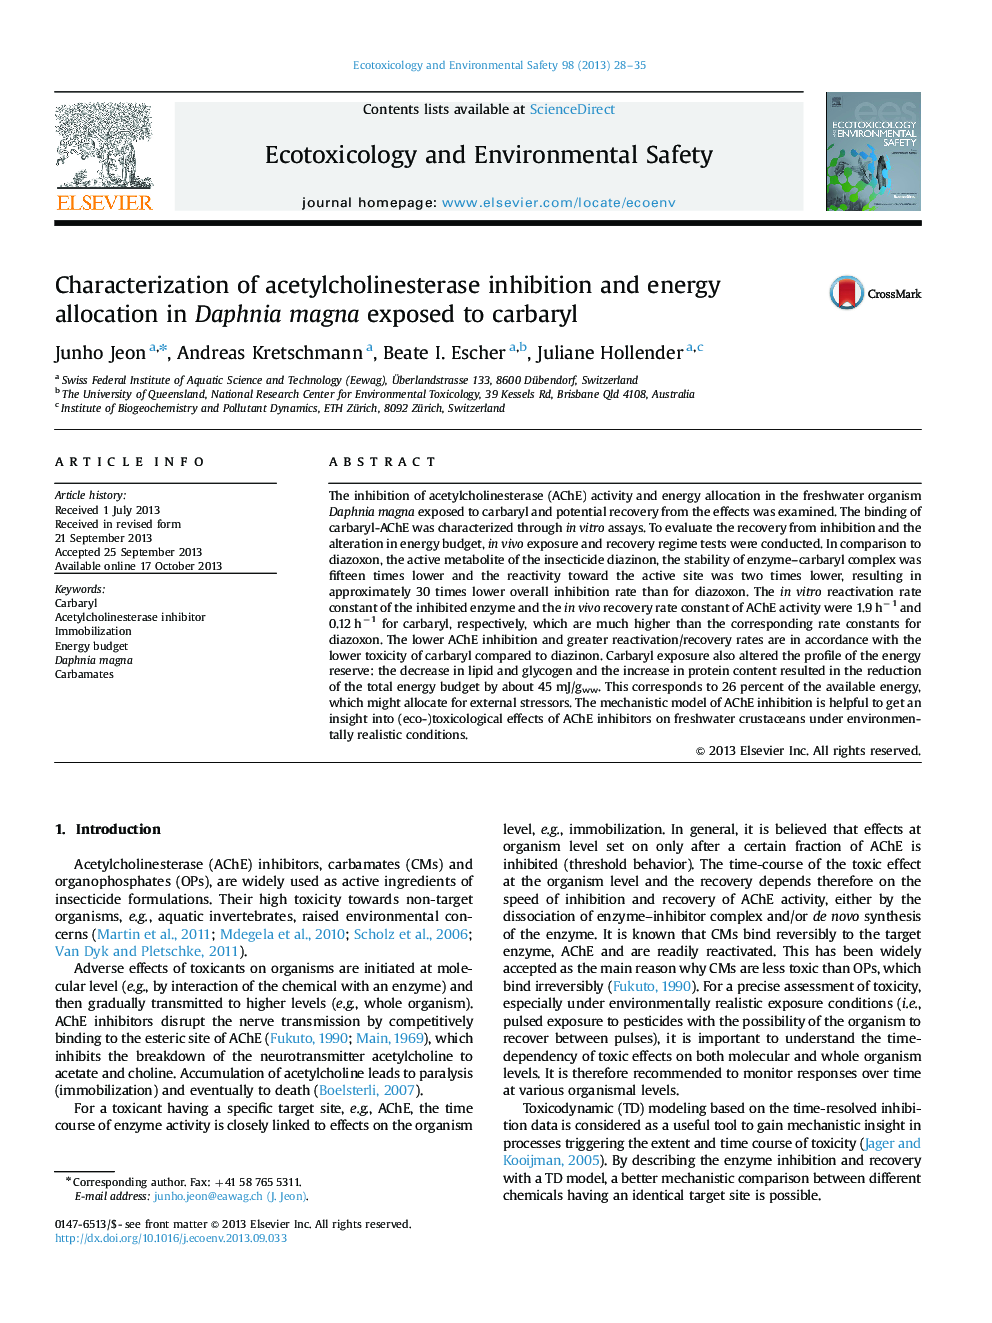 Characterization of acetylcholinesterase inhibition and energy allocation in Daphnia magna exposed to carbaryl